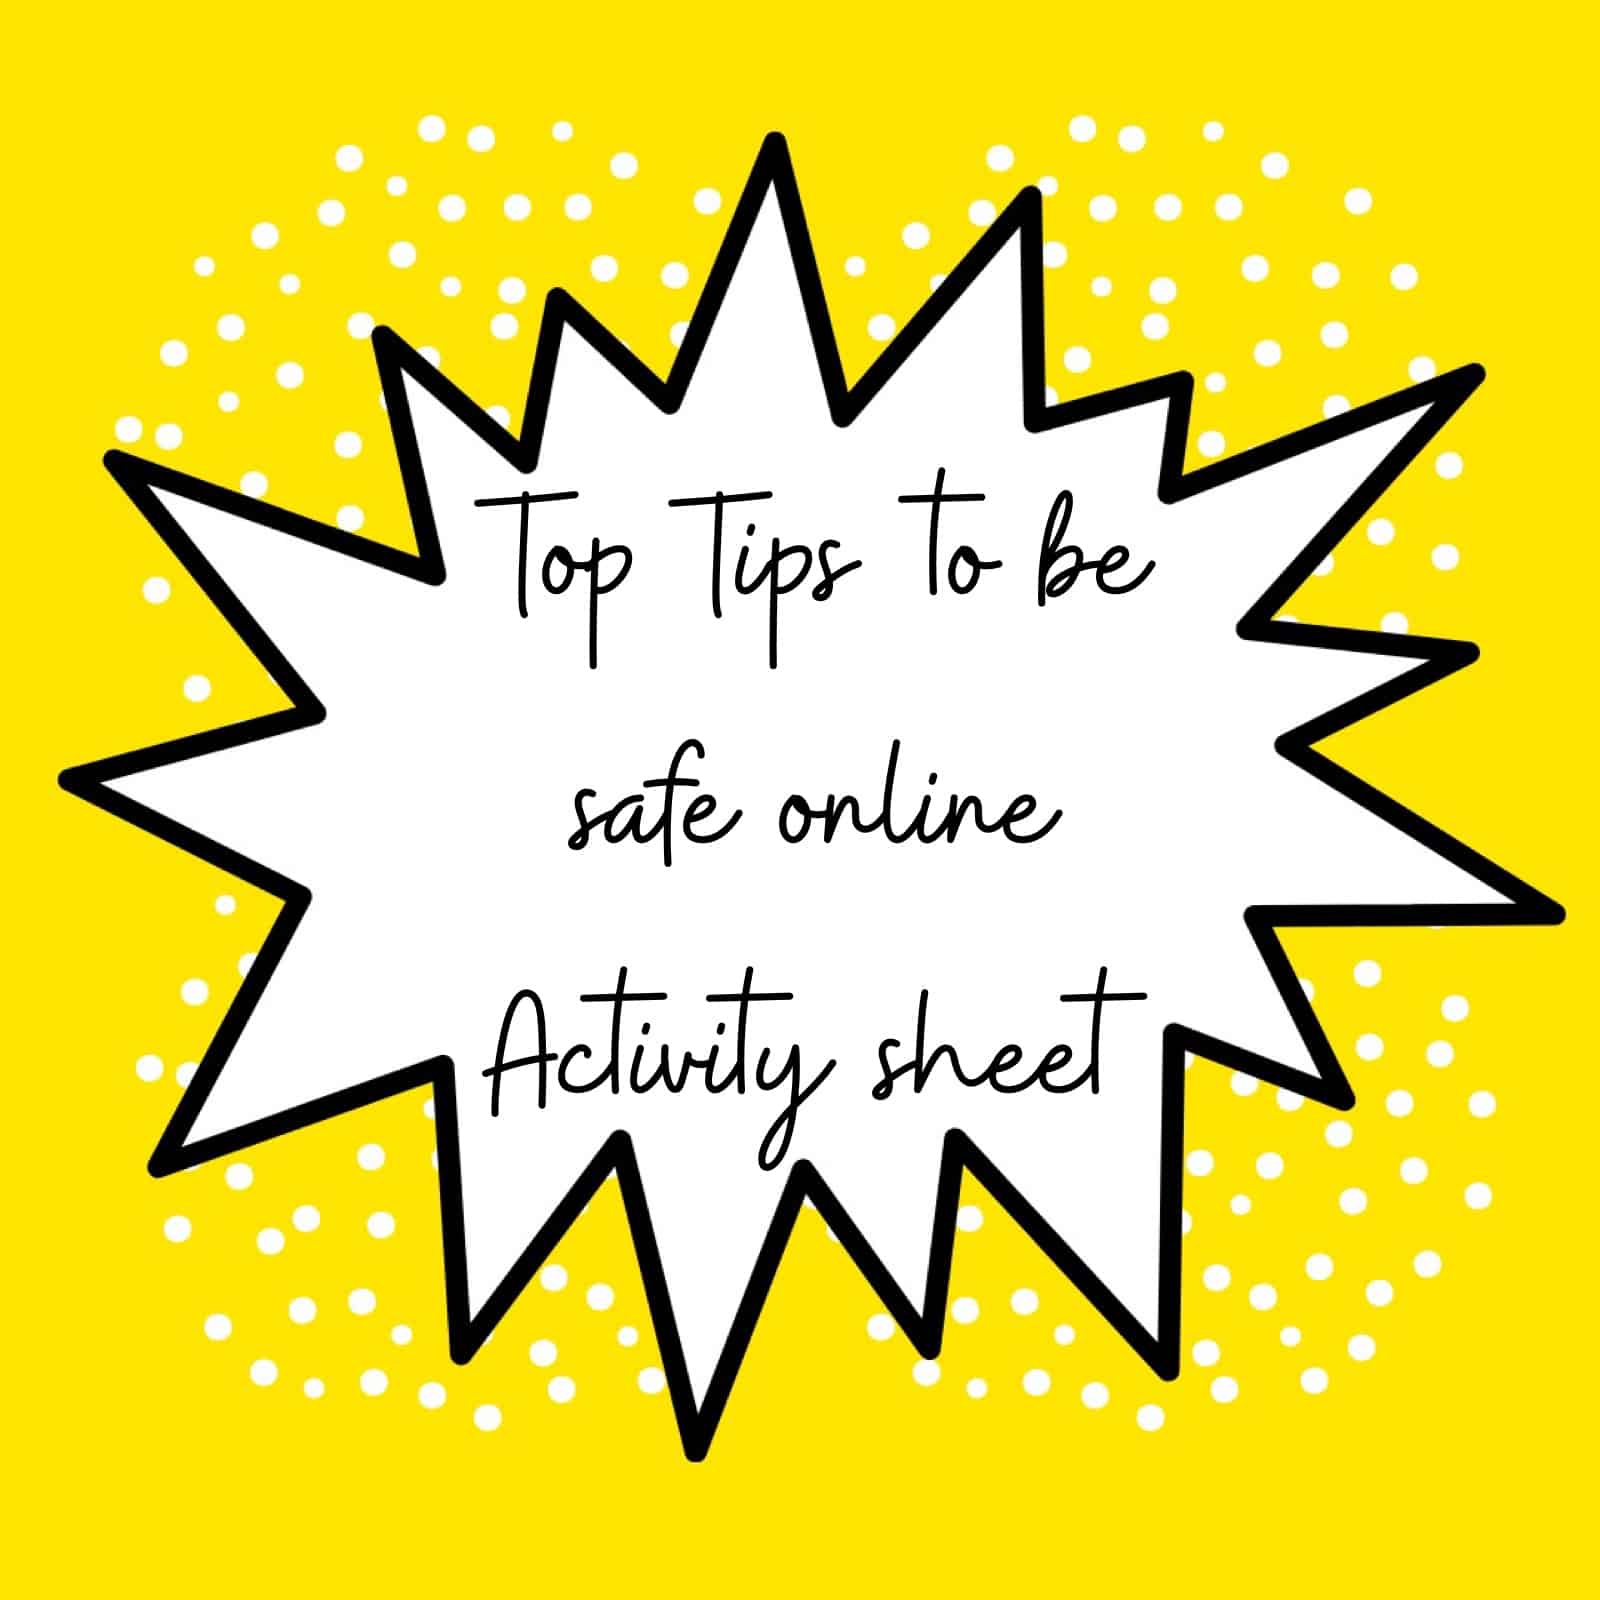 Tips to be safe online activity sheet